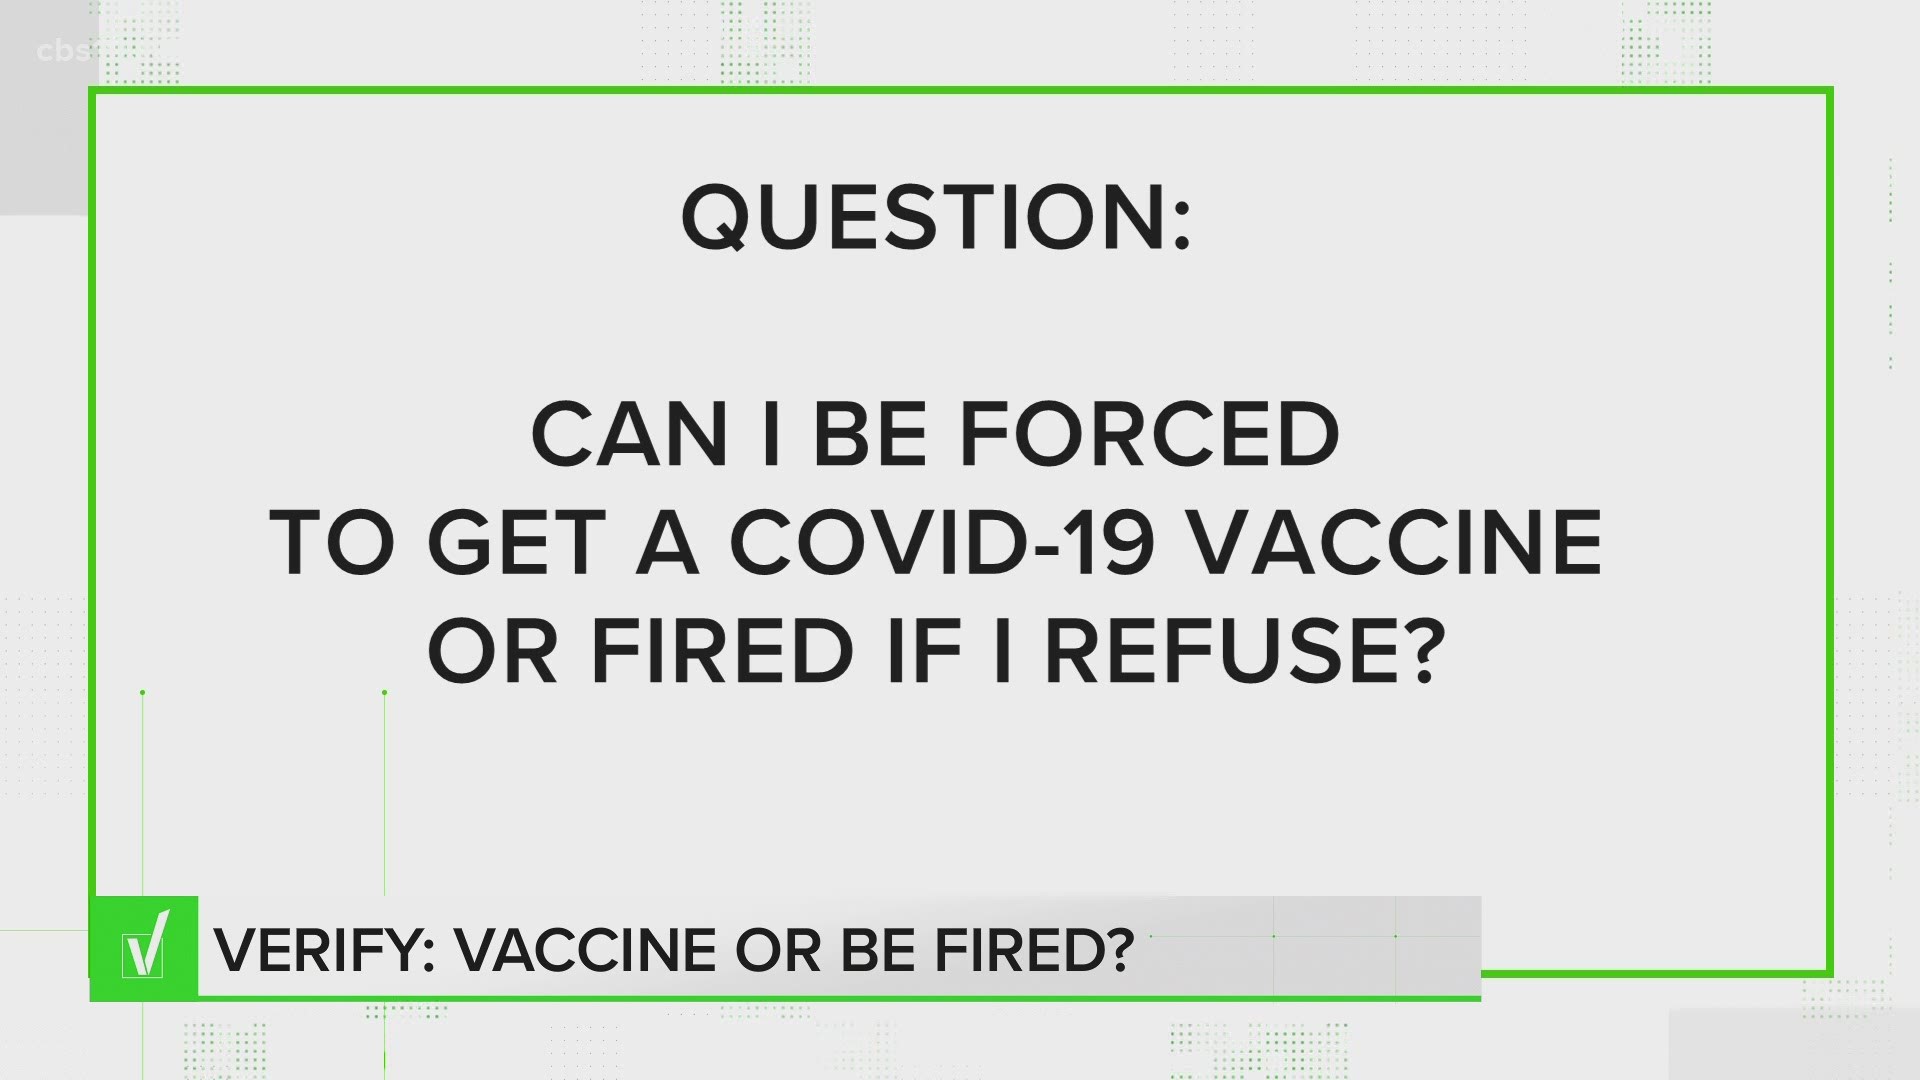 Studies show many people are hesitant to get vaccinated and fear of reprisal for declining the shots leads to lots of questions.